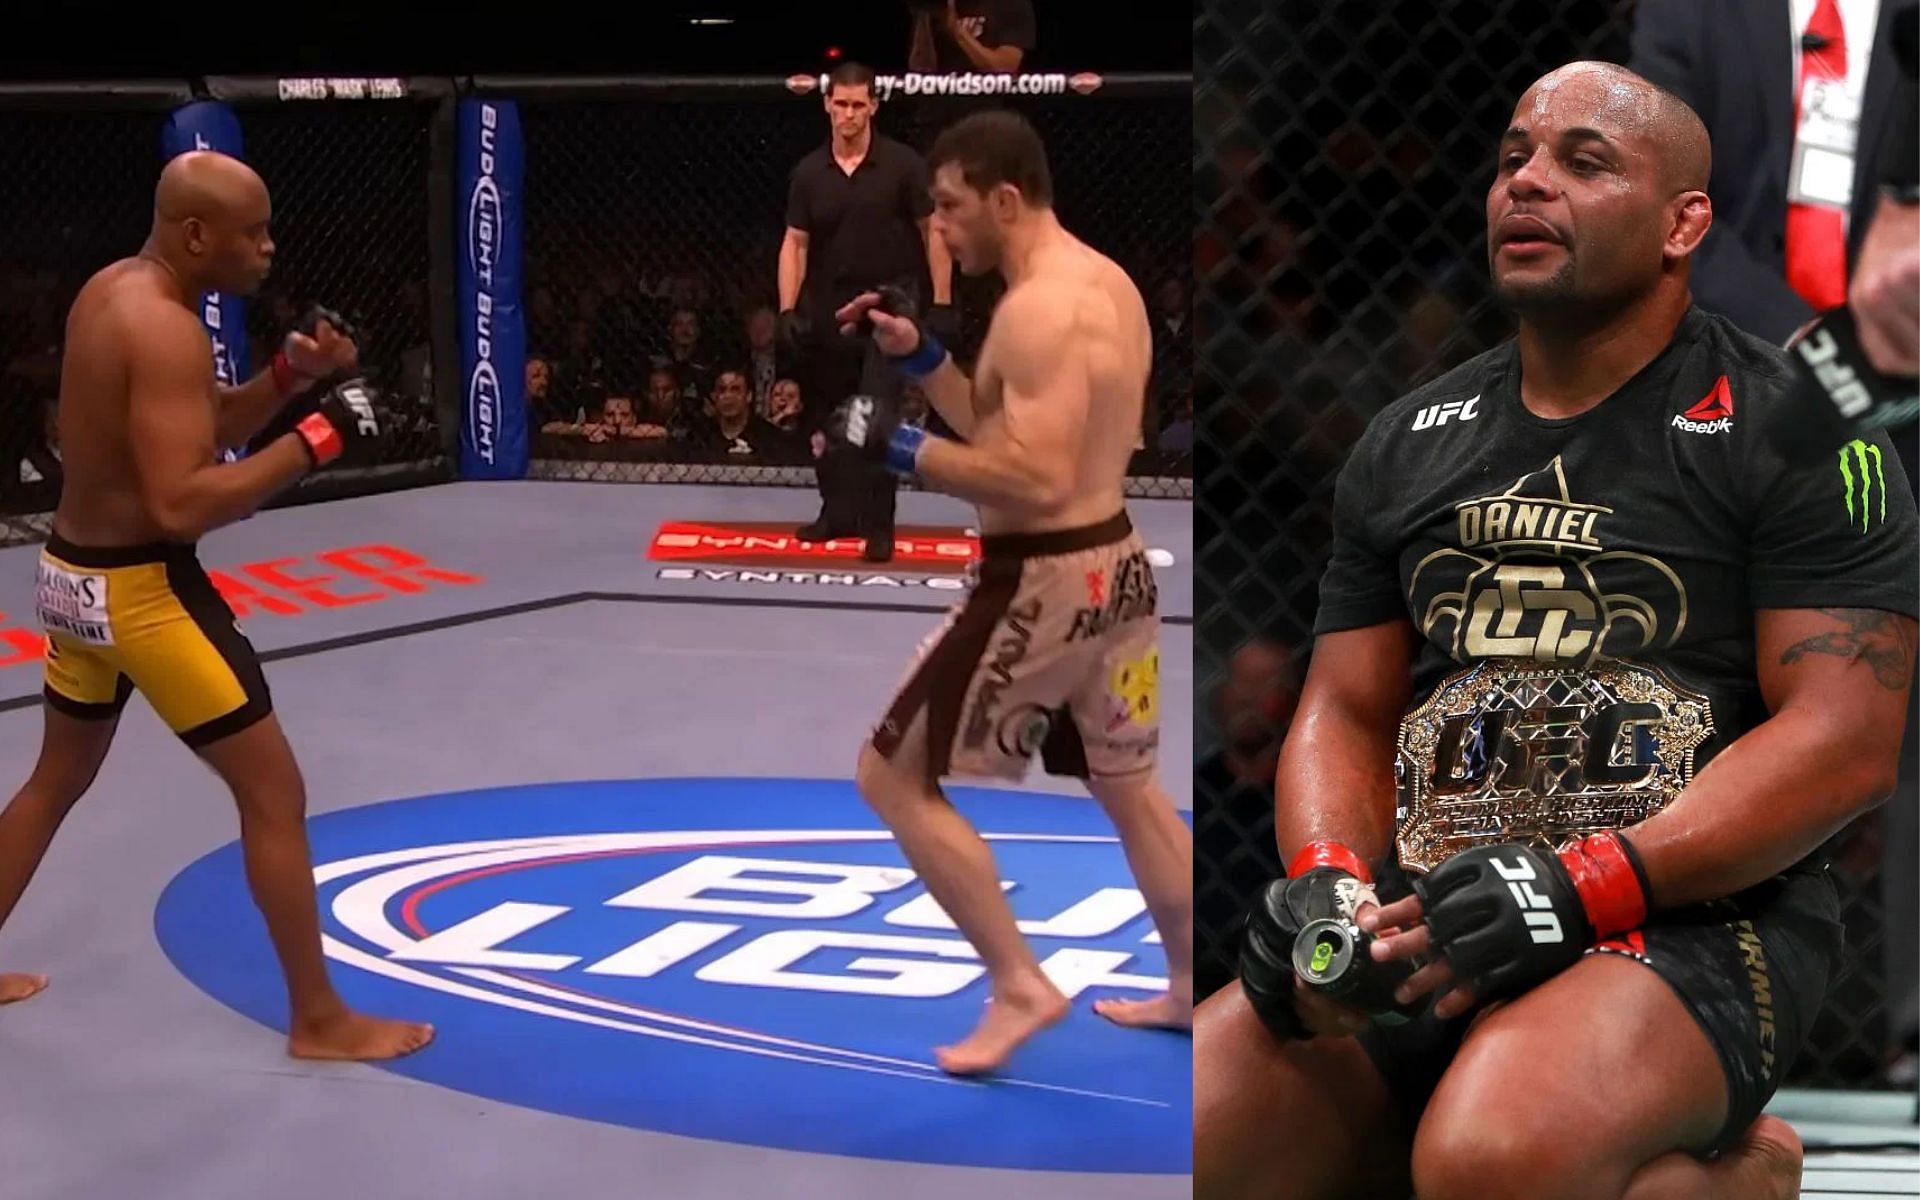 Anderson Silva vs. Forrest Griffin @ UFC101 (left) [Image courtesy of UFC Youtube account.] and Daniel Cormier (right)